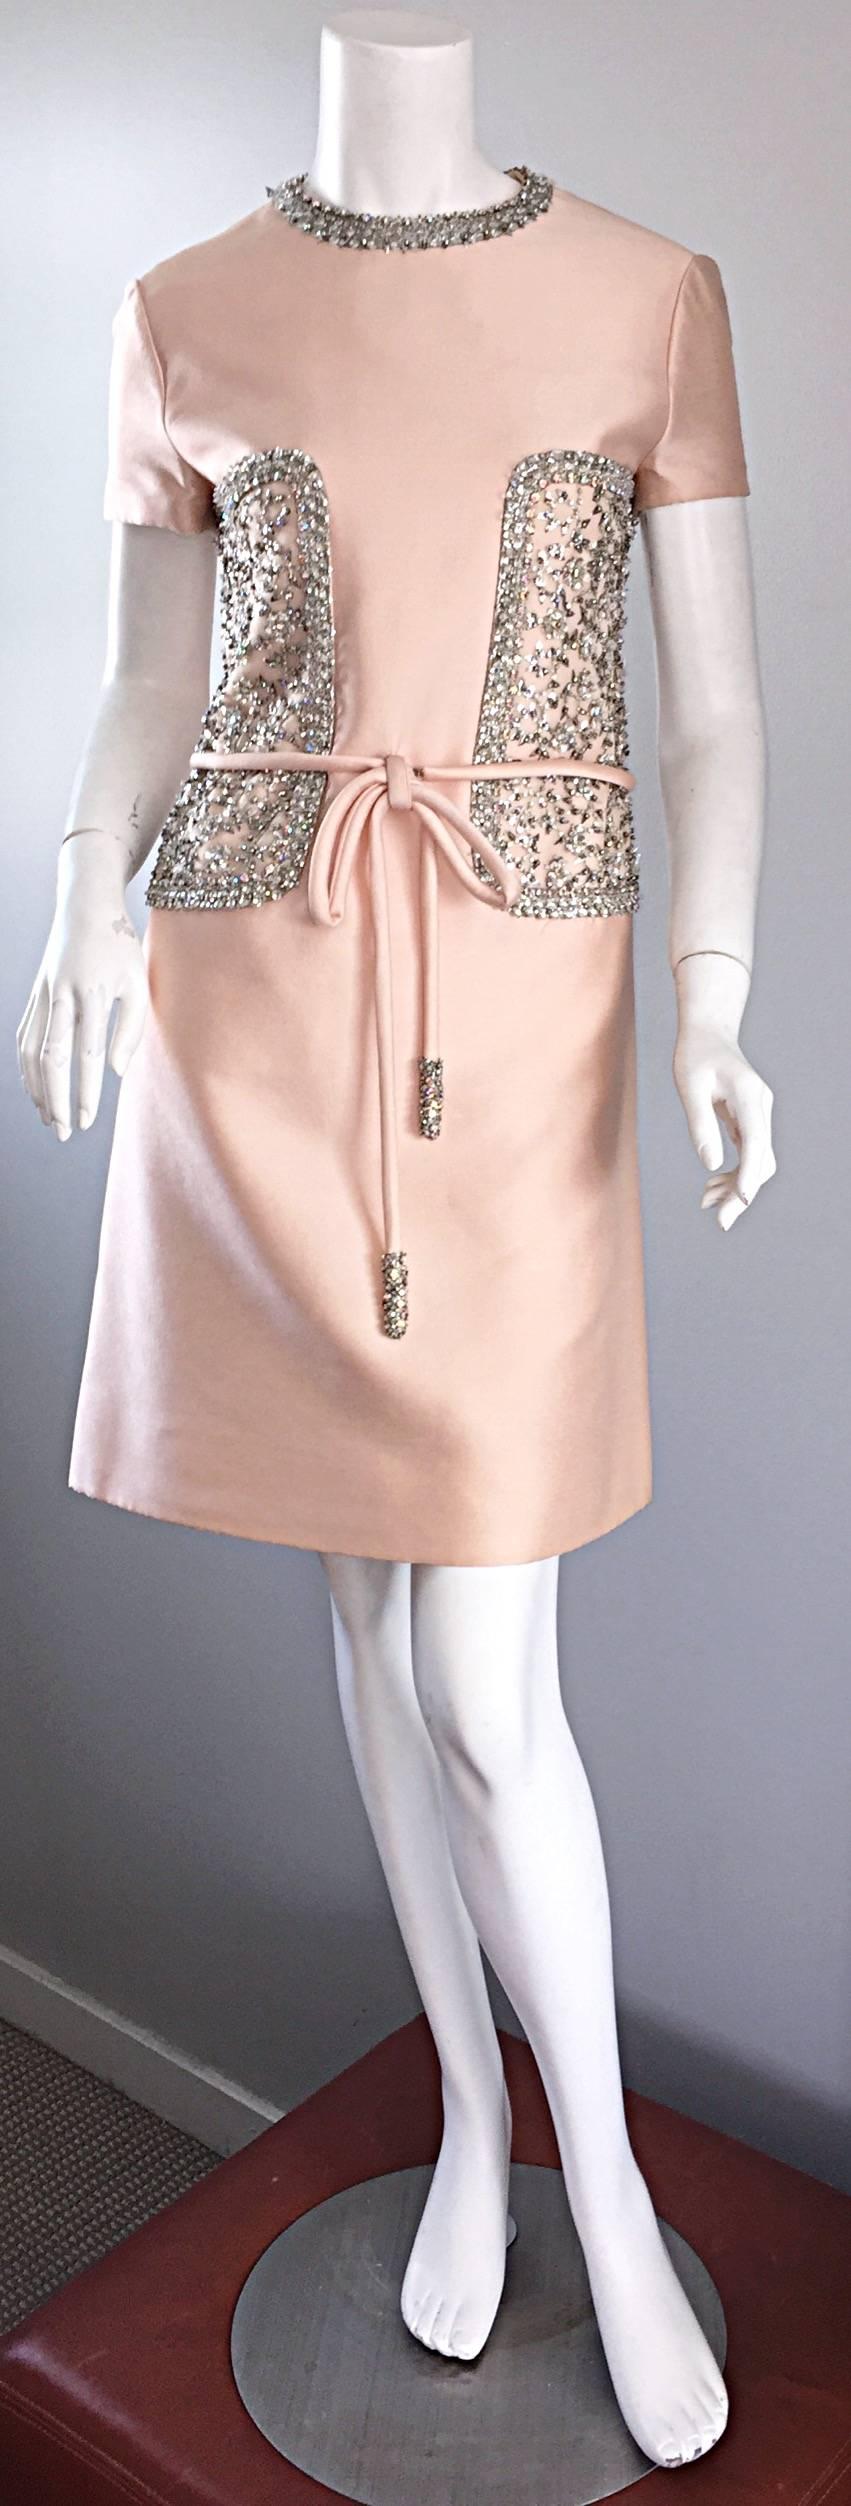 The most unbelievable vintage 60s PAT SANDELR light pink silk dress! Features hundreds of hand-sewn rhinestones and crystals throughout the sides, collar and attached rope belt! Such intricate couture work from a master American designer. Hand-sewn